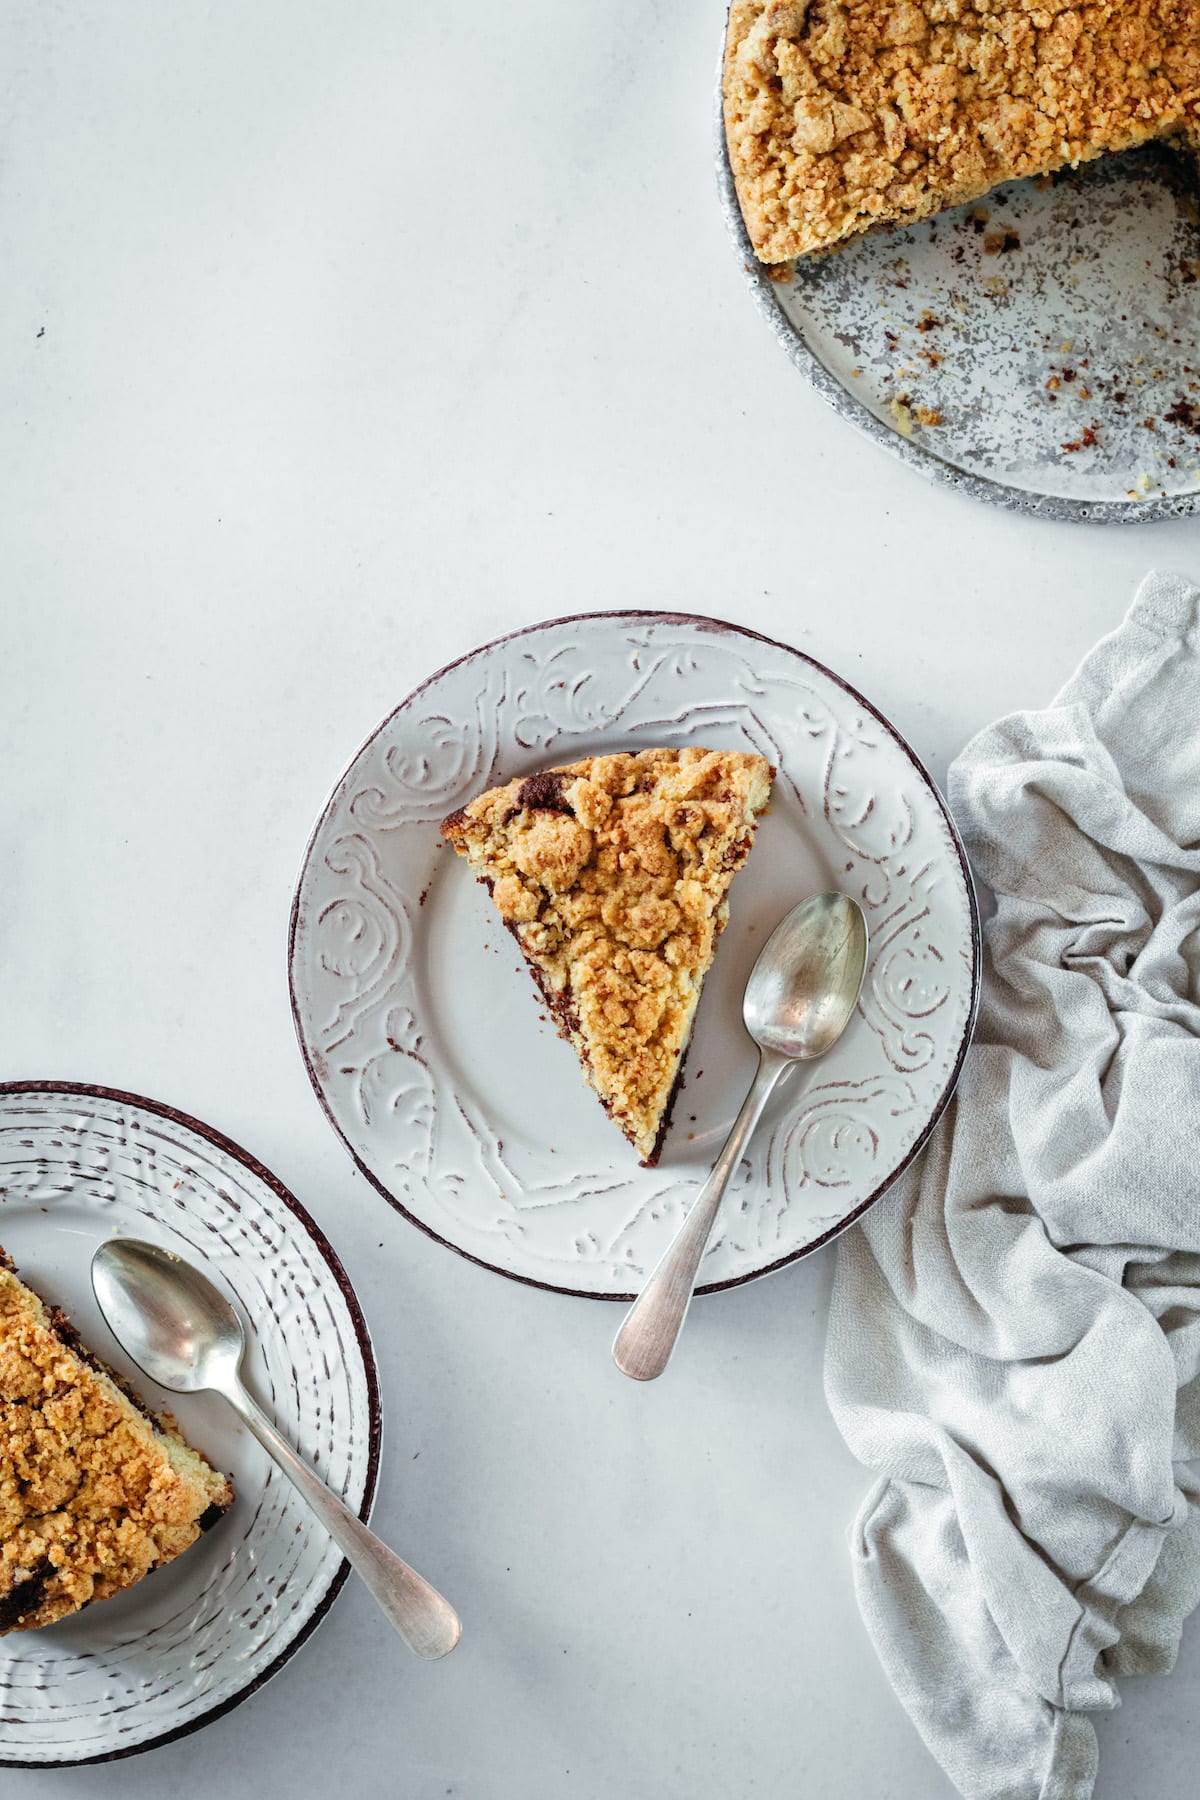 Overhead view of two plates of coffee cake with spoons, with remaining coffee cake in background